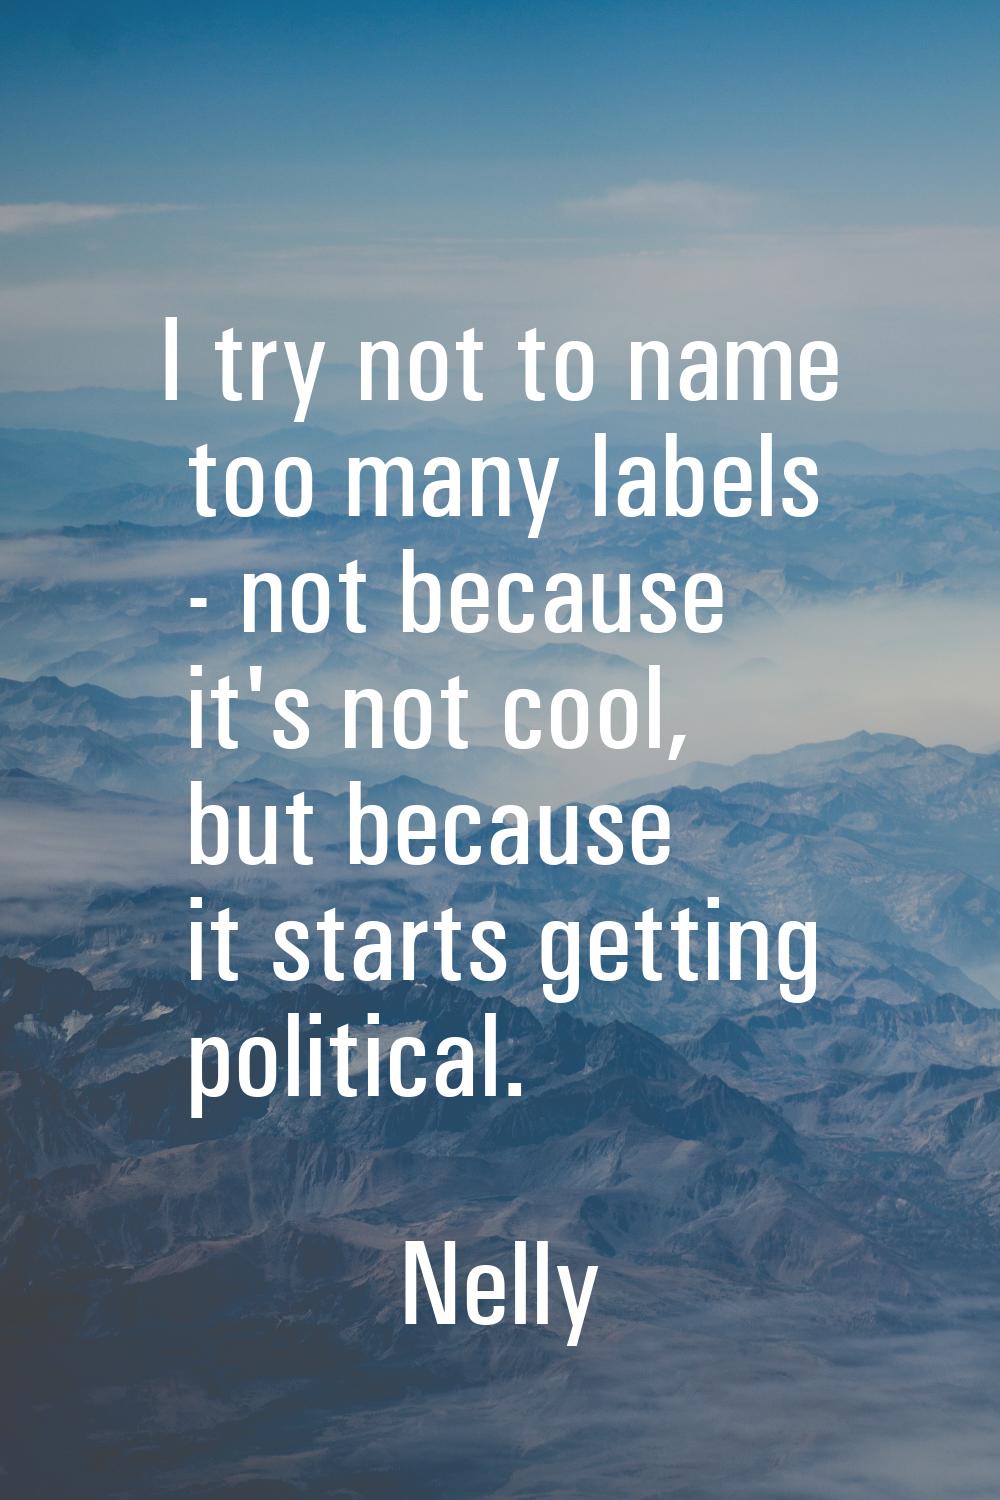 I try not to name too many labels - not because it's not cool, but because it starts getting politi